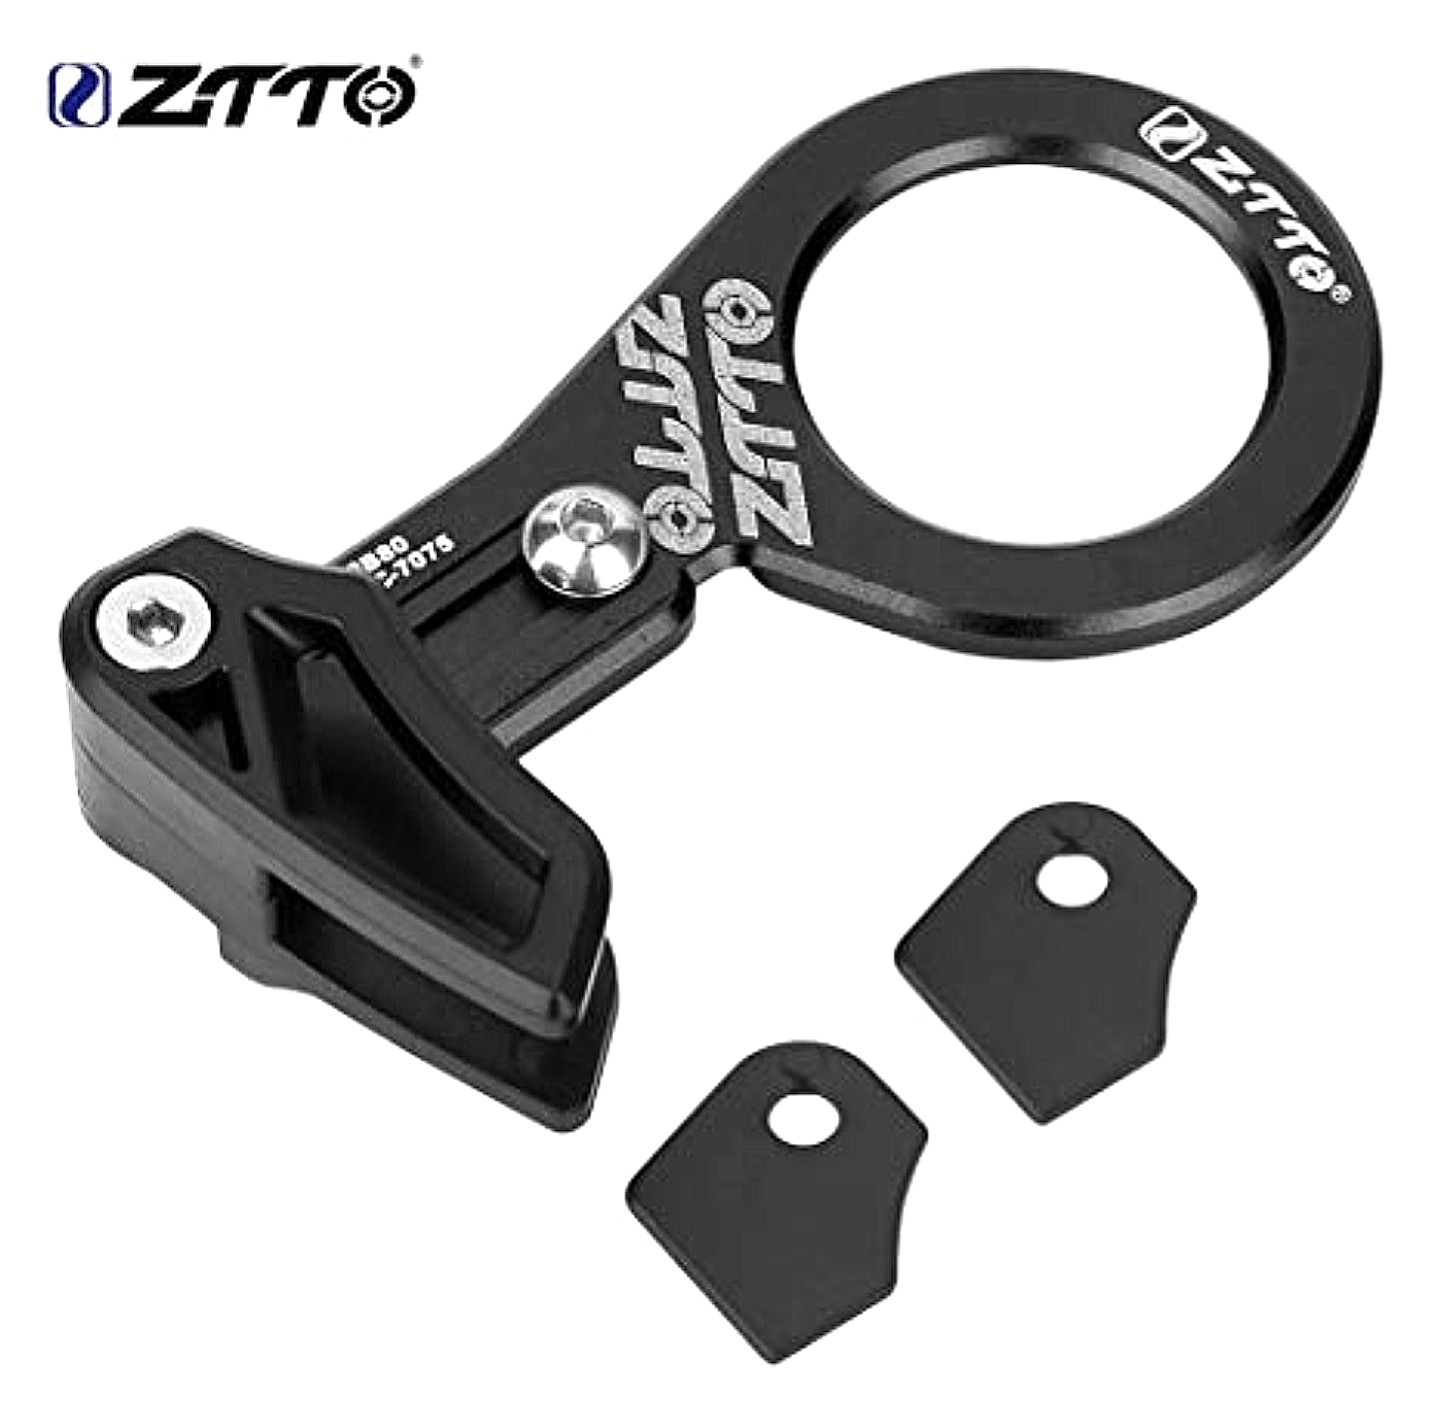 ztto components